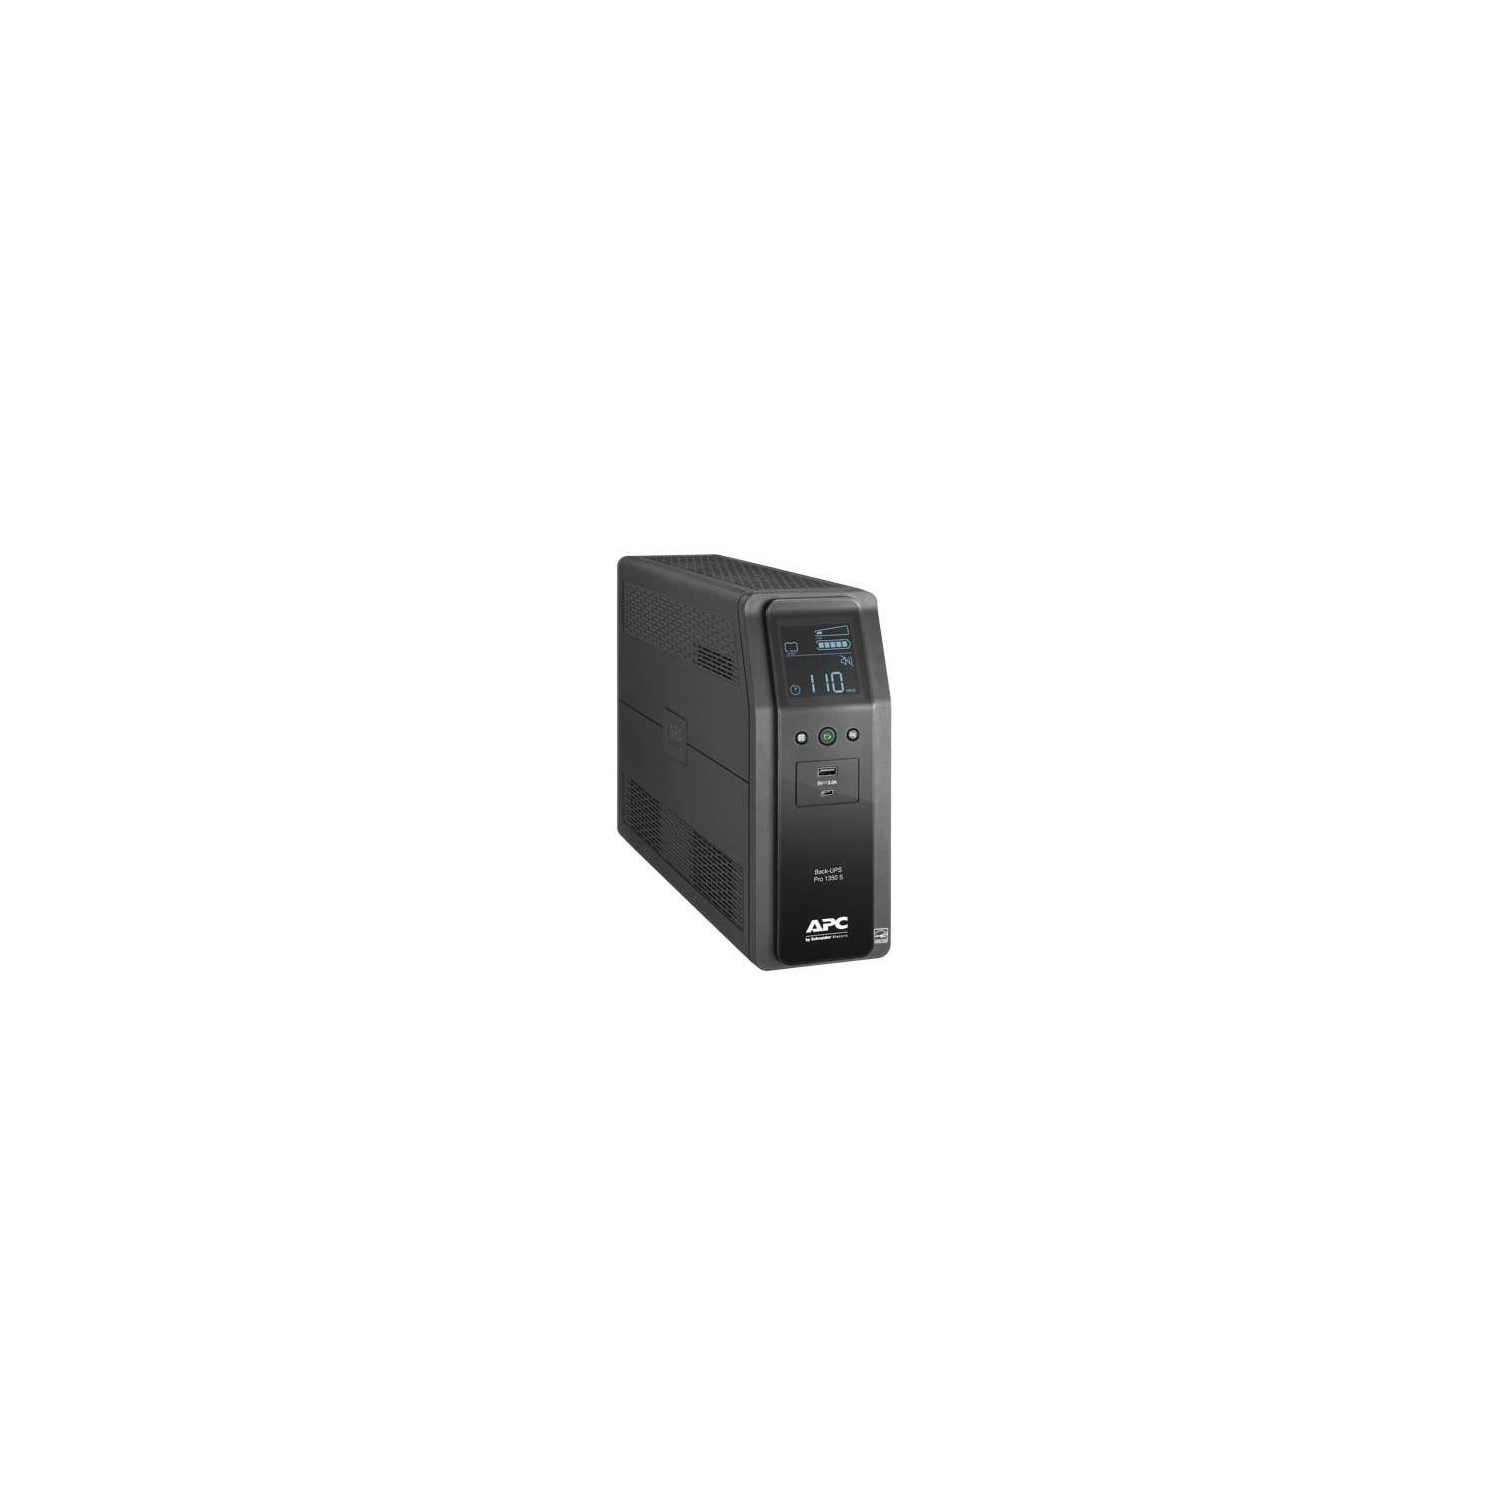 APC Back-UPS Pro BR 1350VA with SineWave, 10 Outlets, 2 USB Charging Ports and LCD Interface